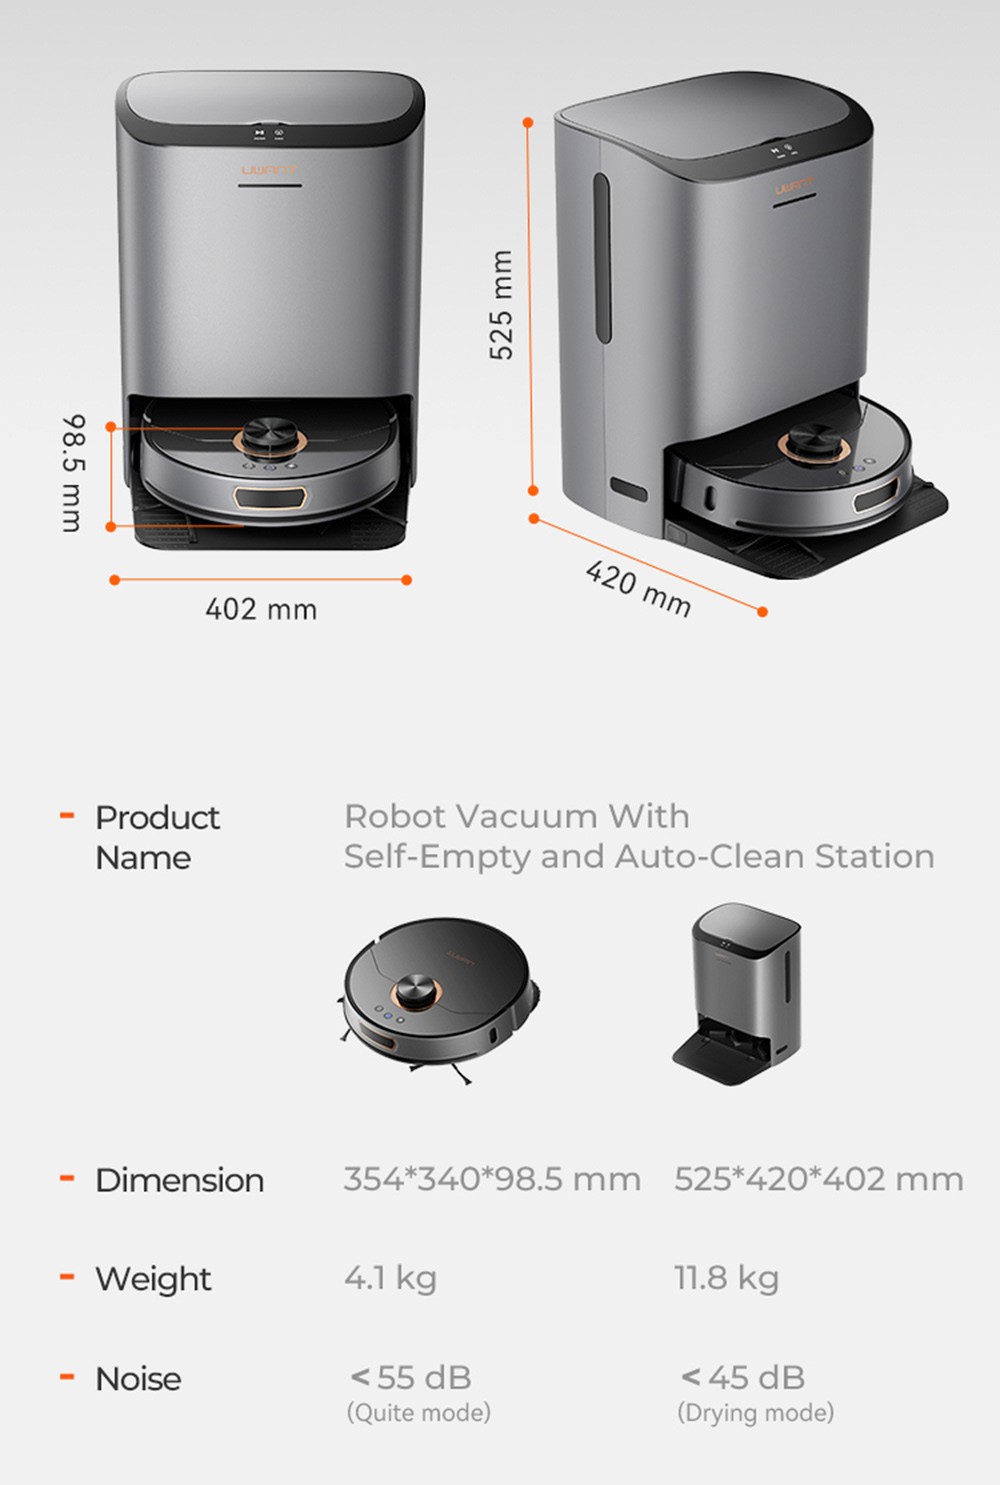 UWANT U200 Robot Vacuum Cleaner, 5000Pa Suction, Self-Cleaning, Self-Emptying, Dual-Disc Mopping, 4L Clean Water Tank, 5200mAh Battery, App/Voice Control - Grey